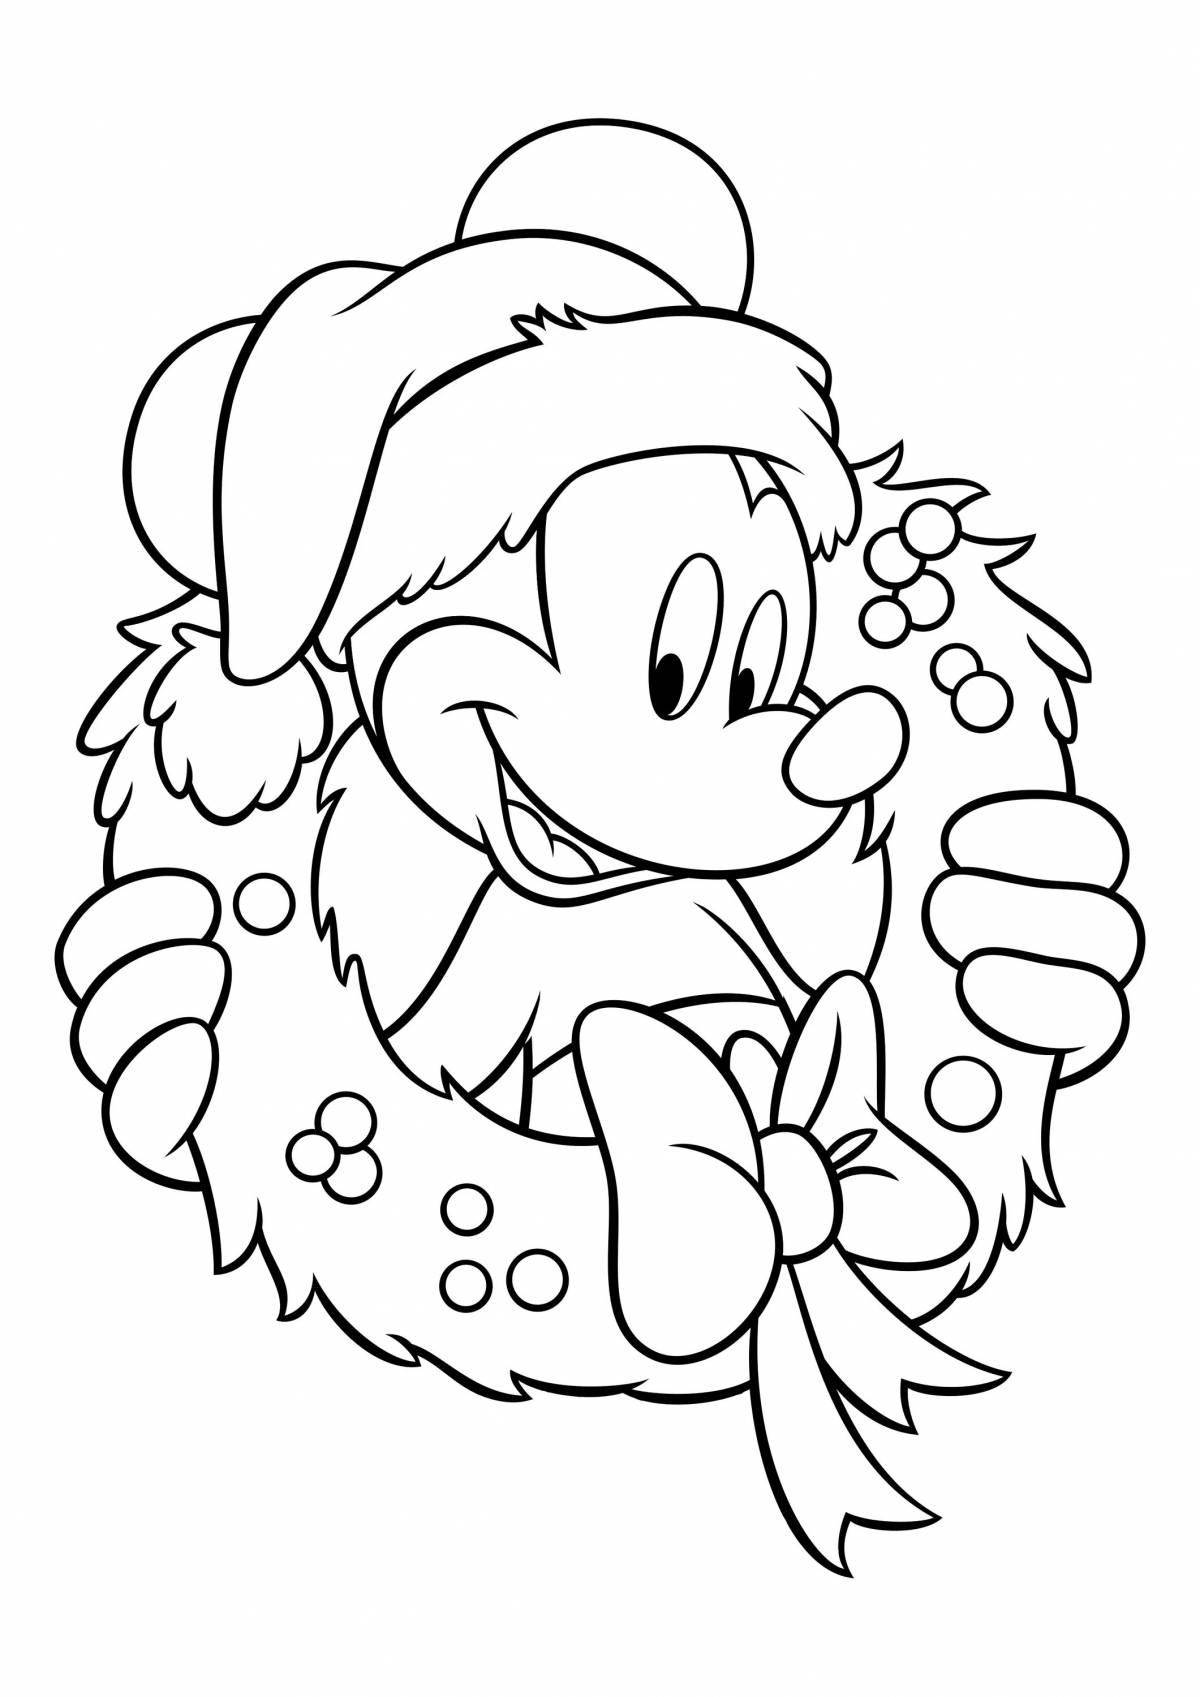 Color explosion christmas characters coloring page